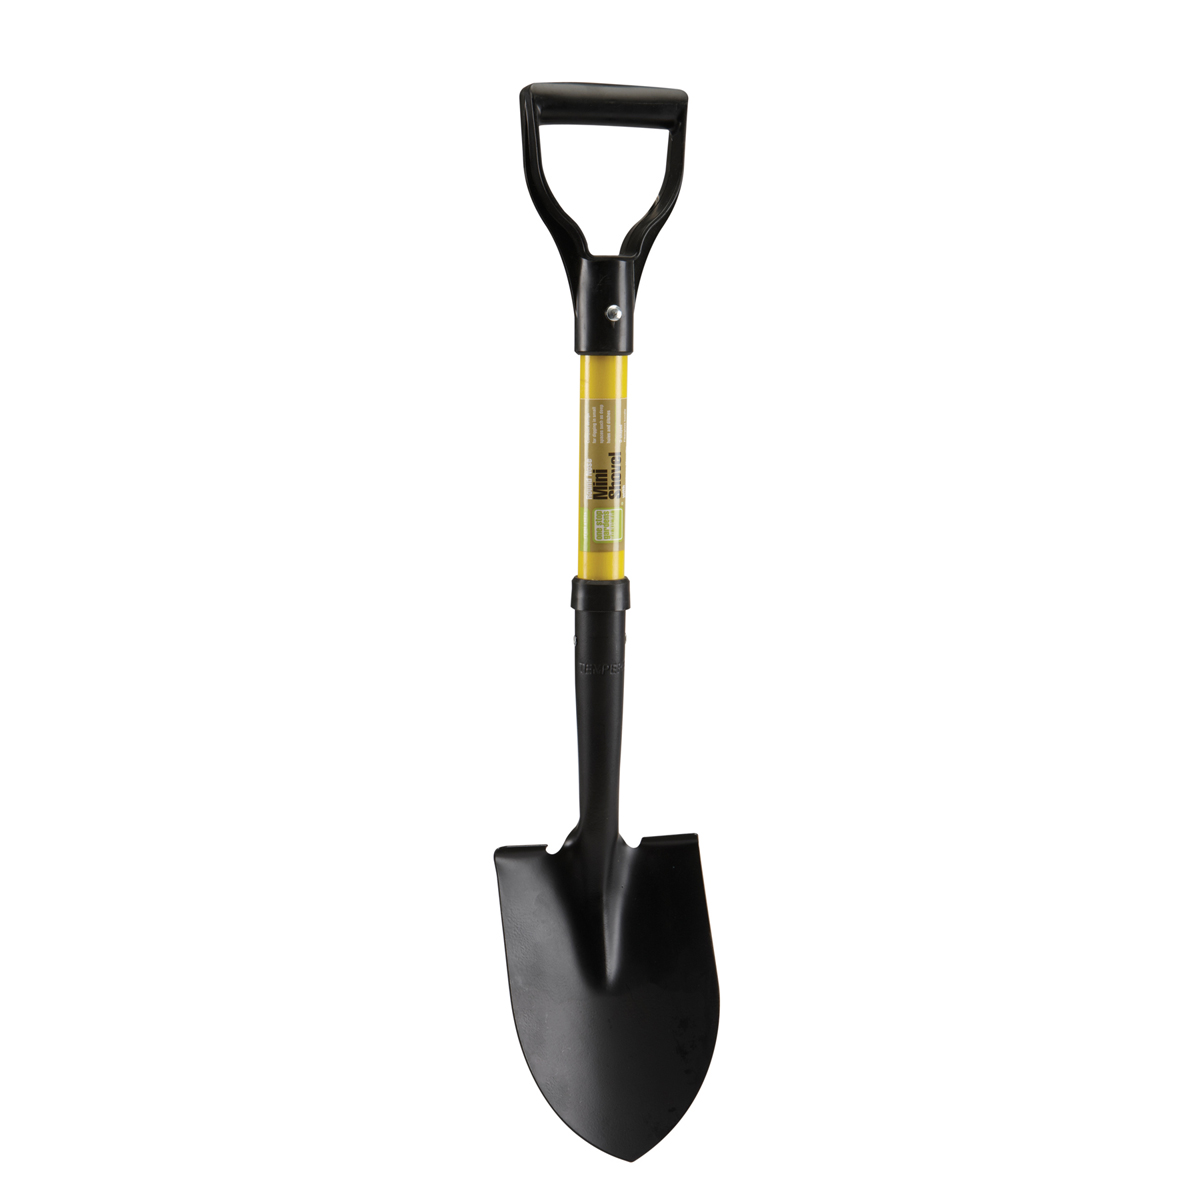 ONE STOP GARDENS 27 In. Round Nose Mini Shovel With D-Handle - Item 69826 / 99894 / 64922